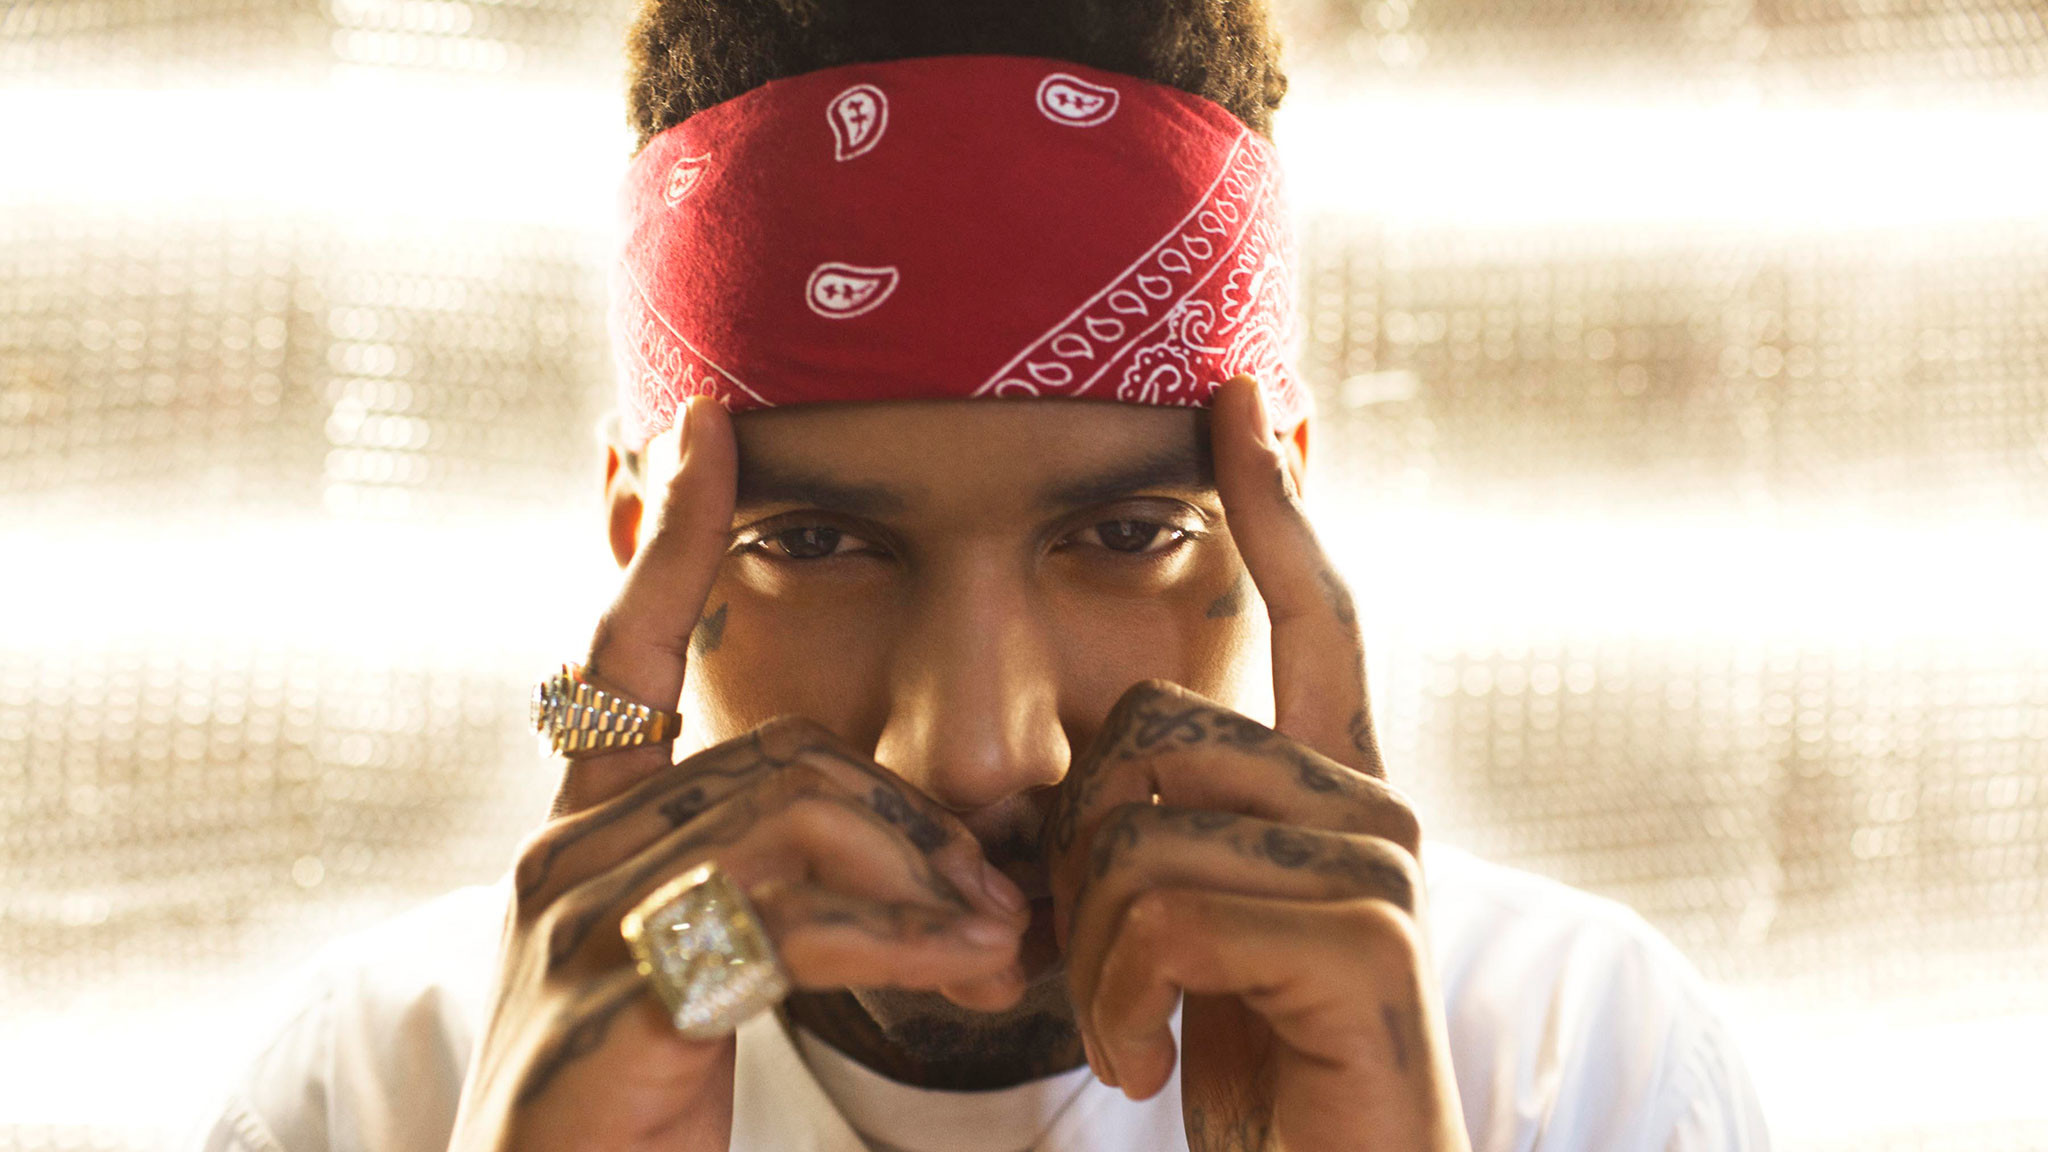 2048x1152 LA-based rapper Kid Ink, who has collaborated with R. Kelly and Chris